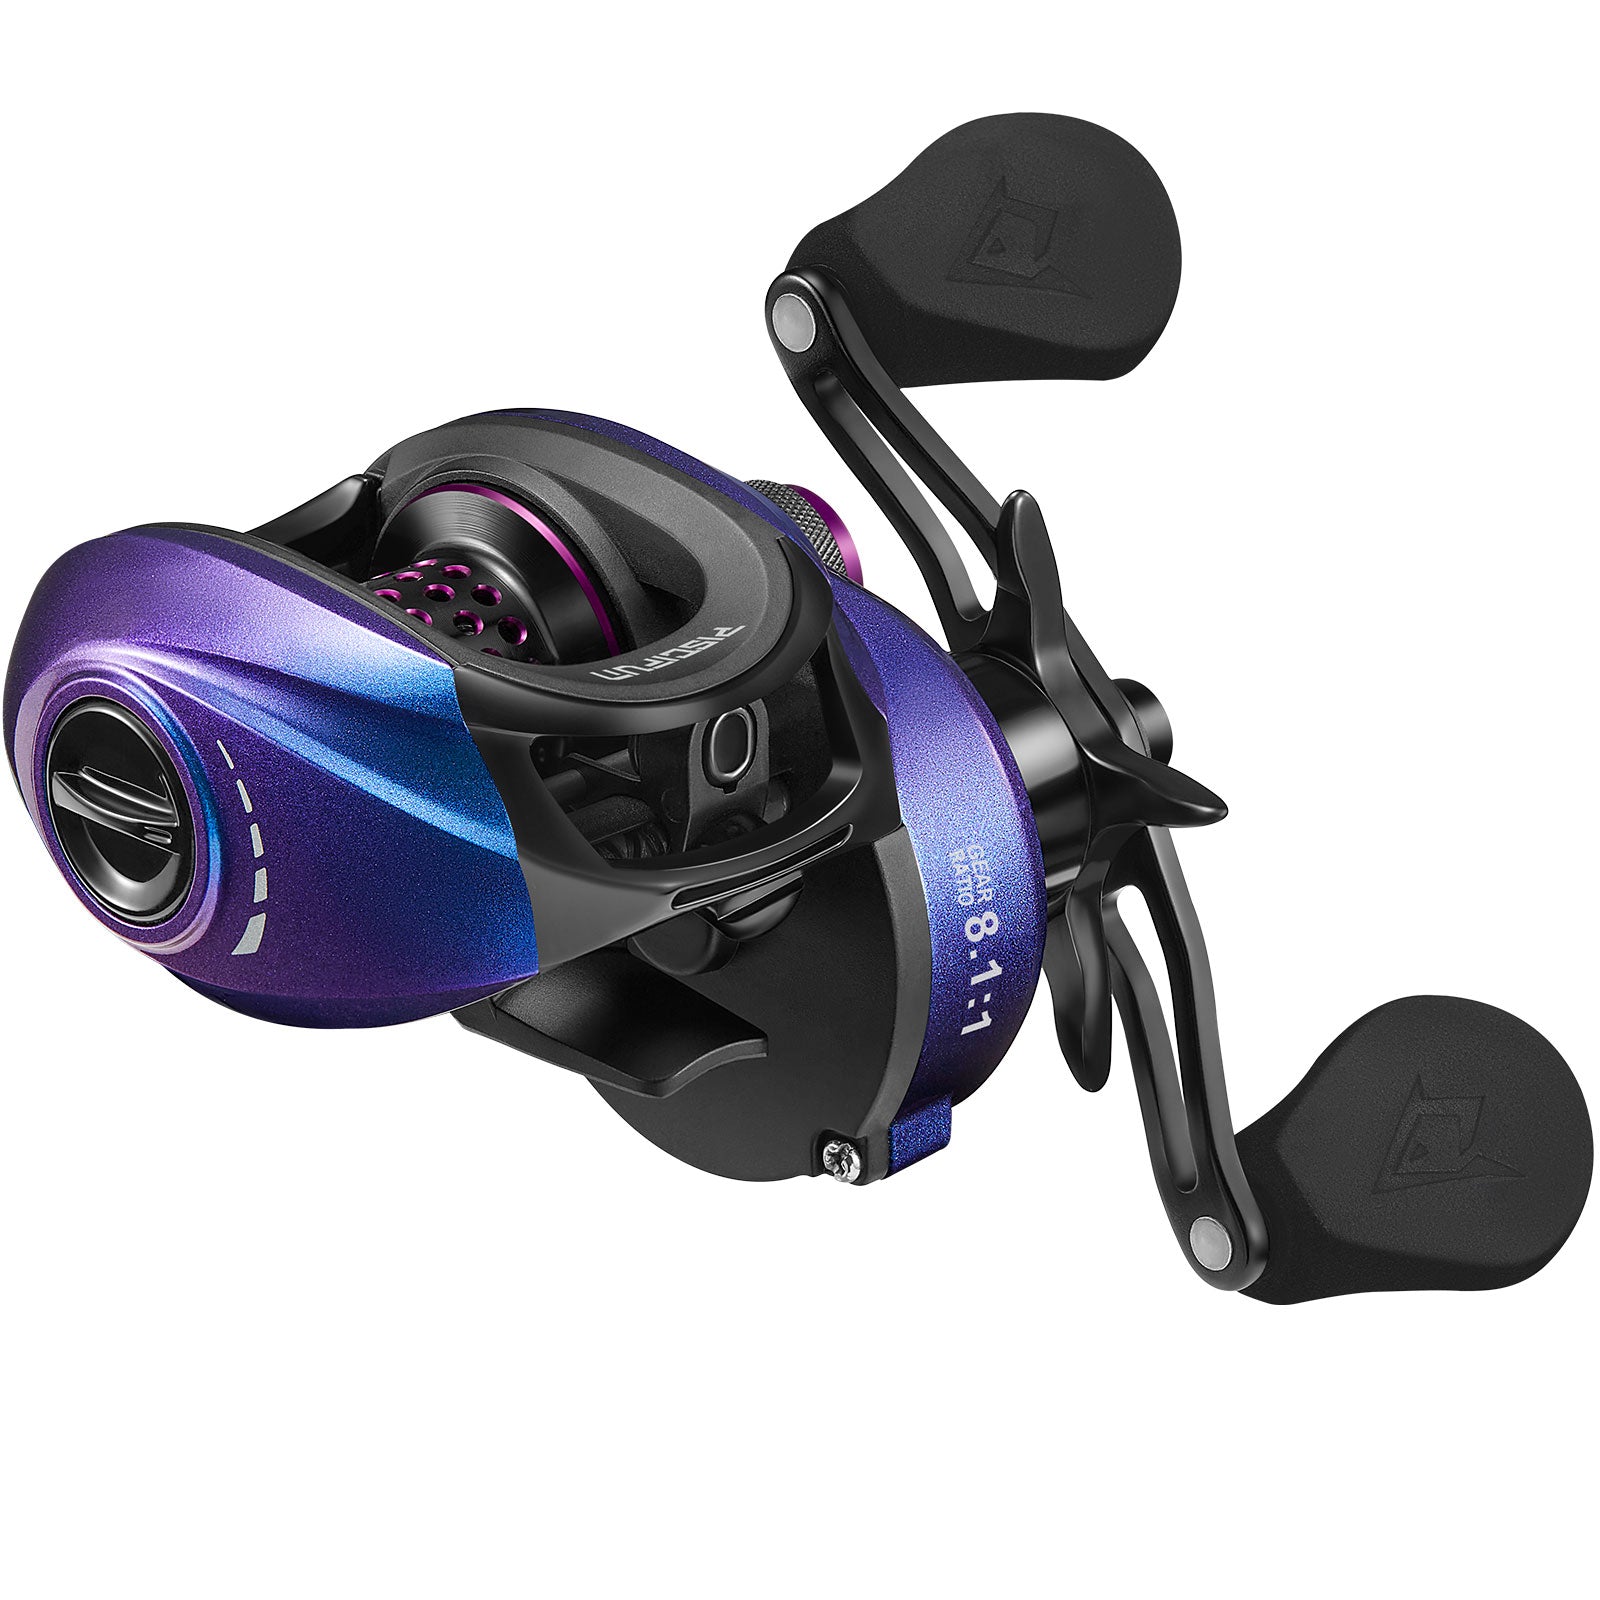 Spark Pro Colorful Baitcaster Fishing Reels, 8.1:1 / Left Hand